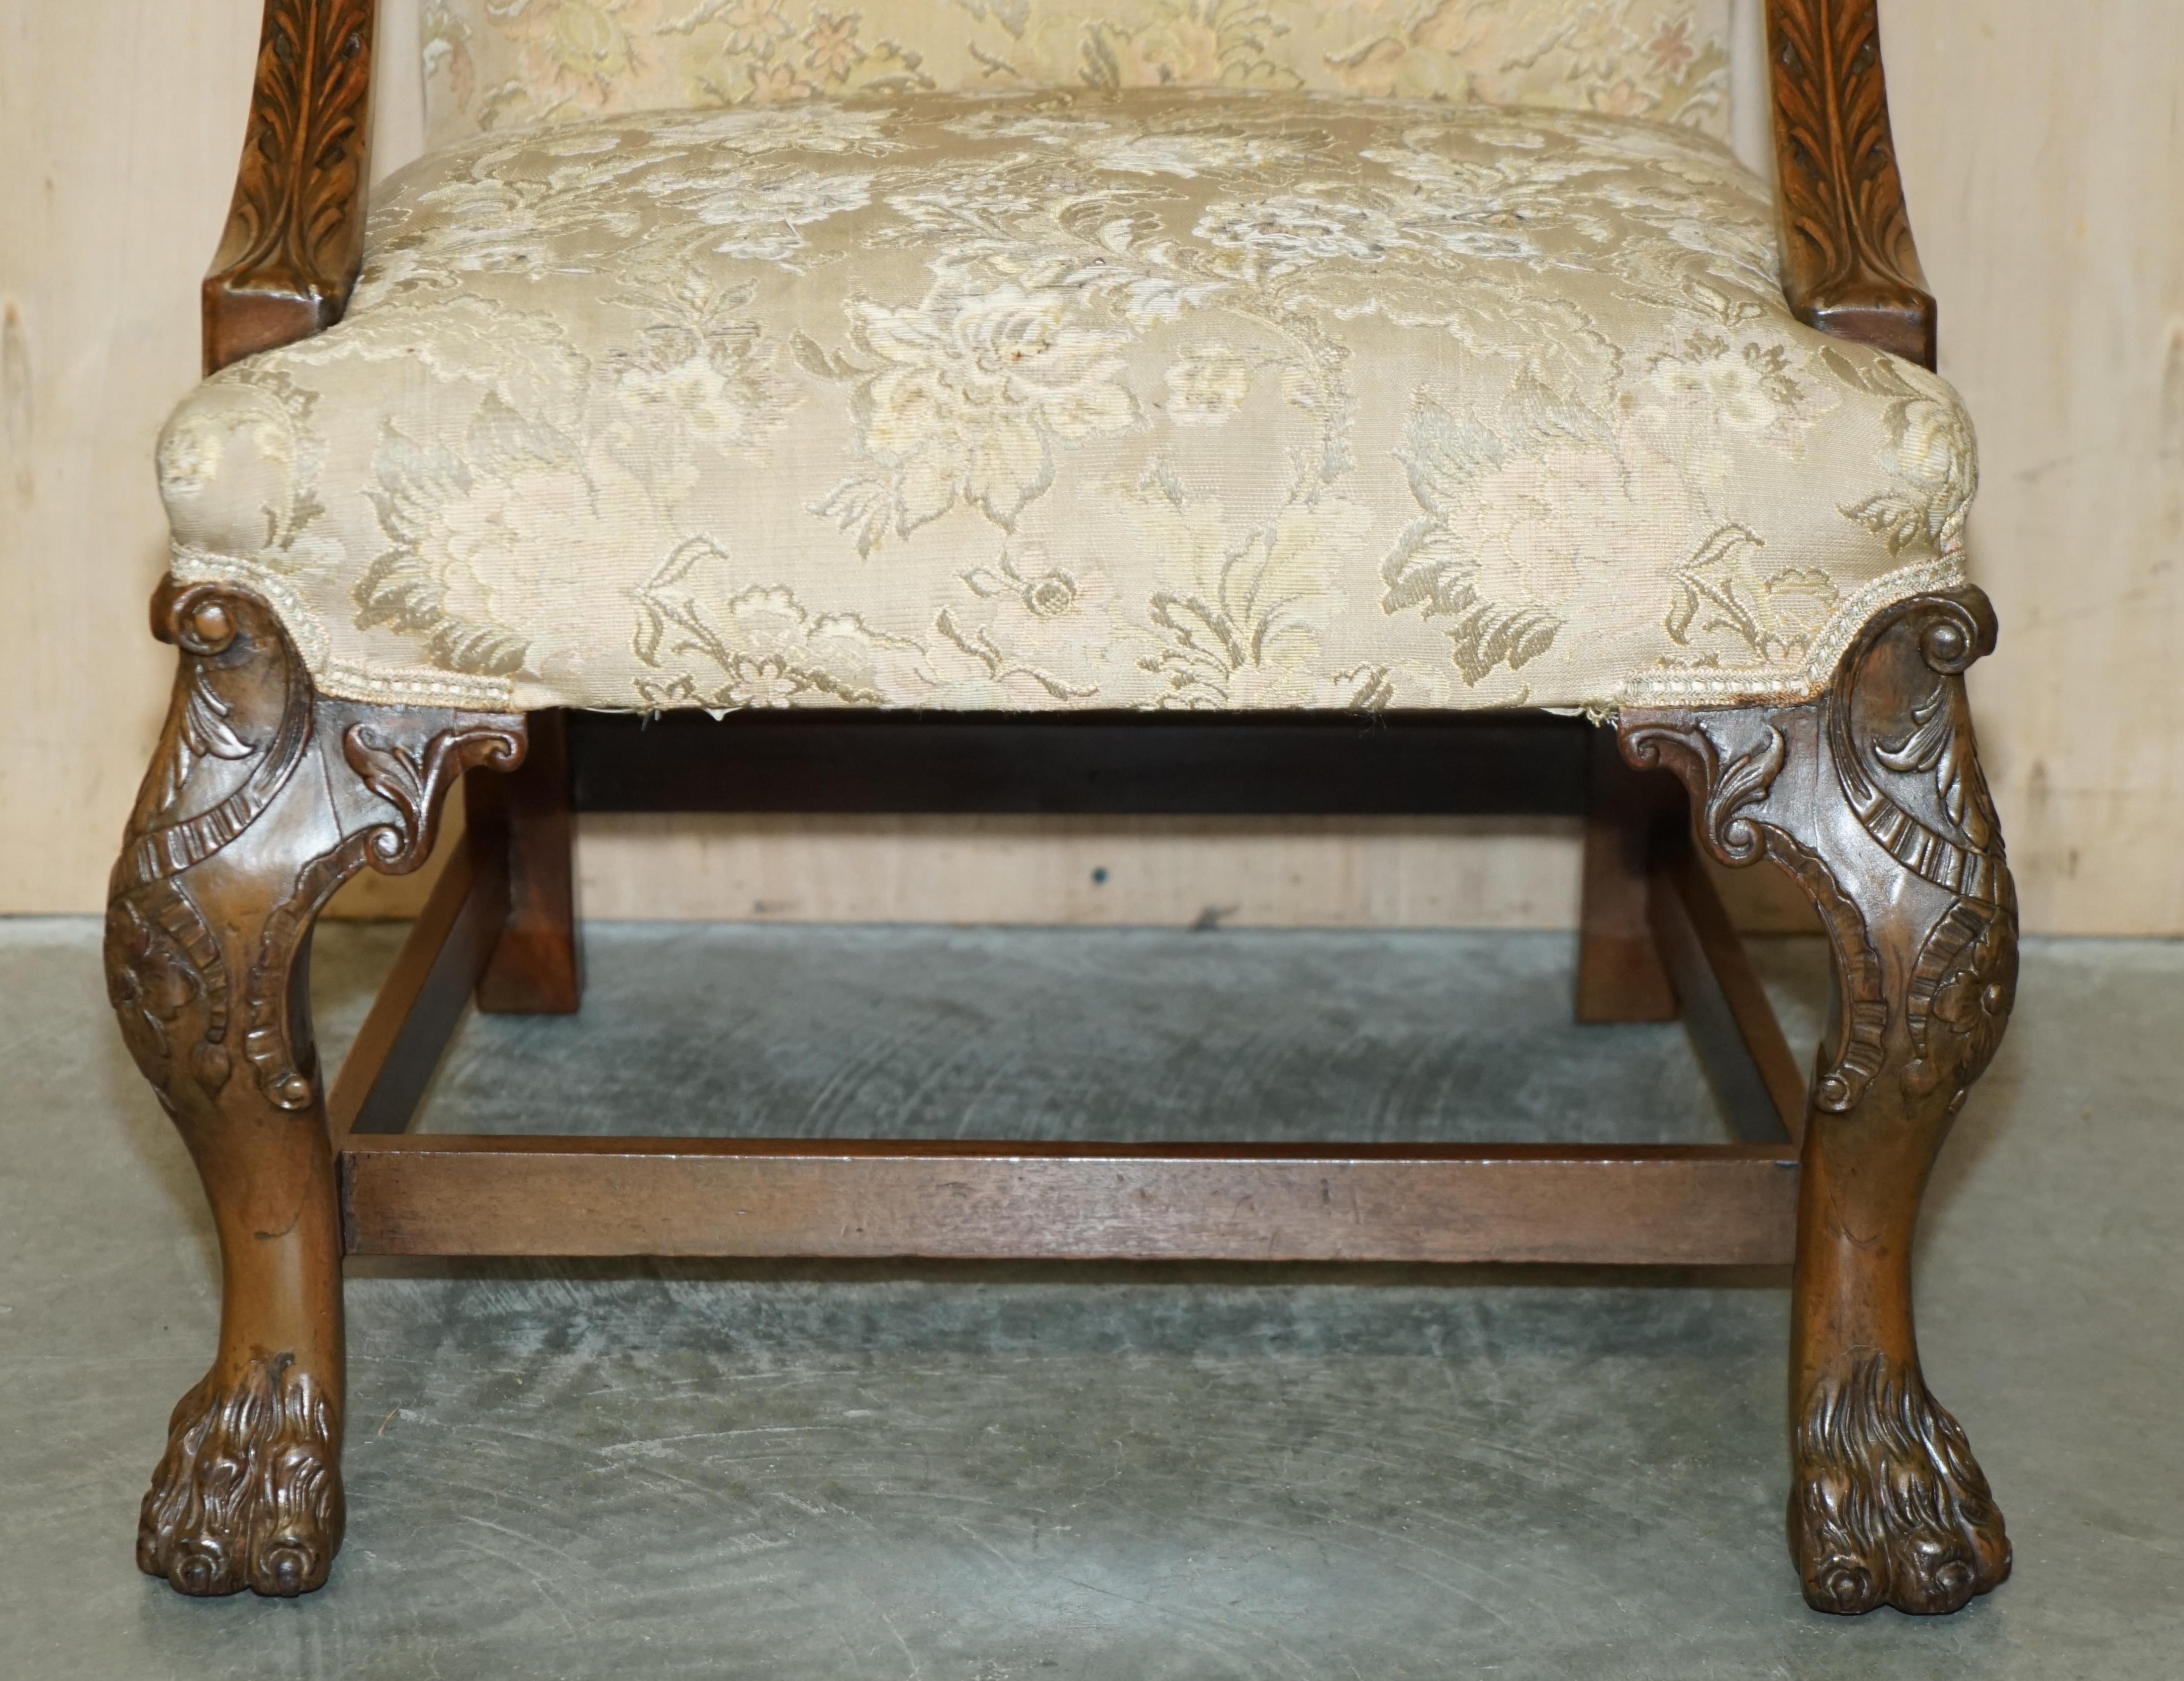 ANTIQUE CIRCA 1880 IRISH GEORGE III STYLE HEAViLY CARVED GAINSBOROUGH ARMCHAIR For Sale 1